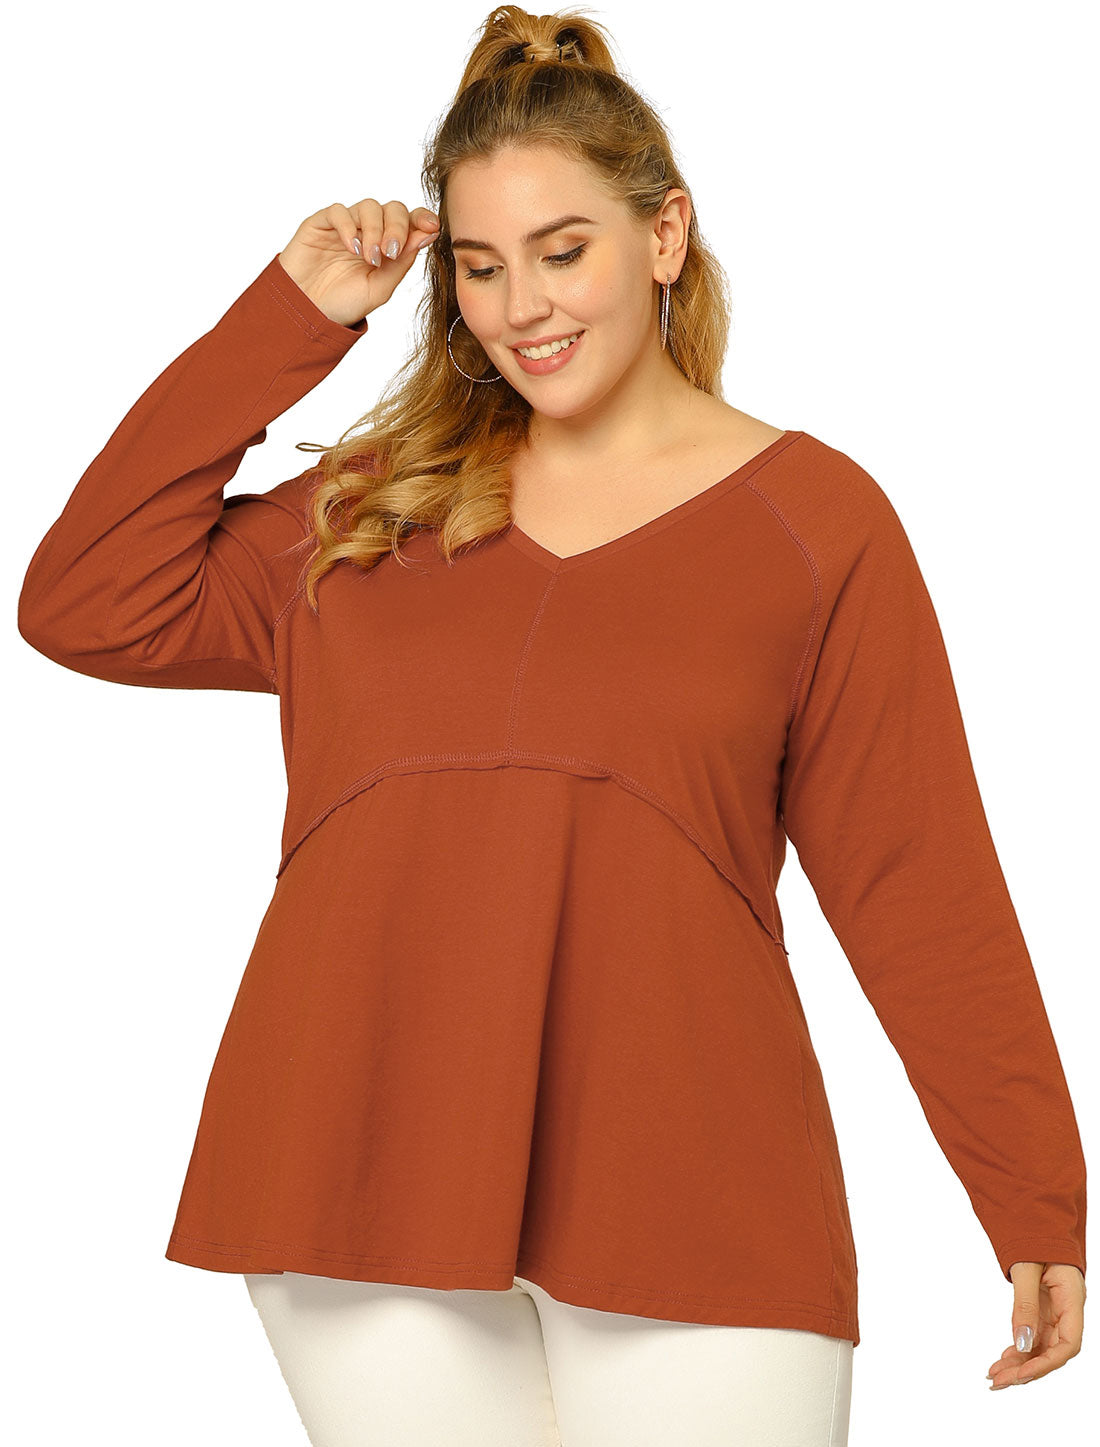 Bublédon Plus Size Casual Round Neck Swing Long Sleeves Trim Knit Top